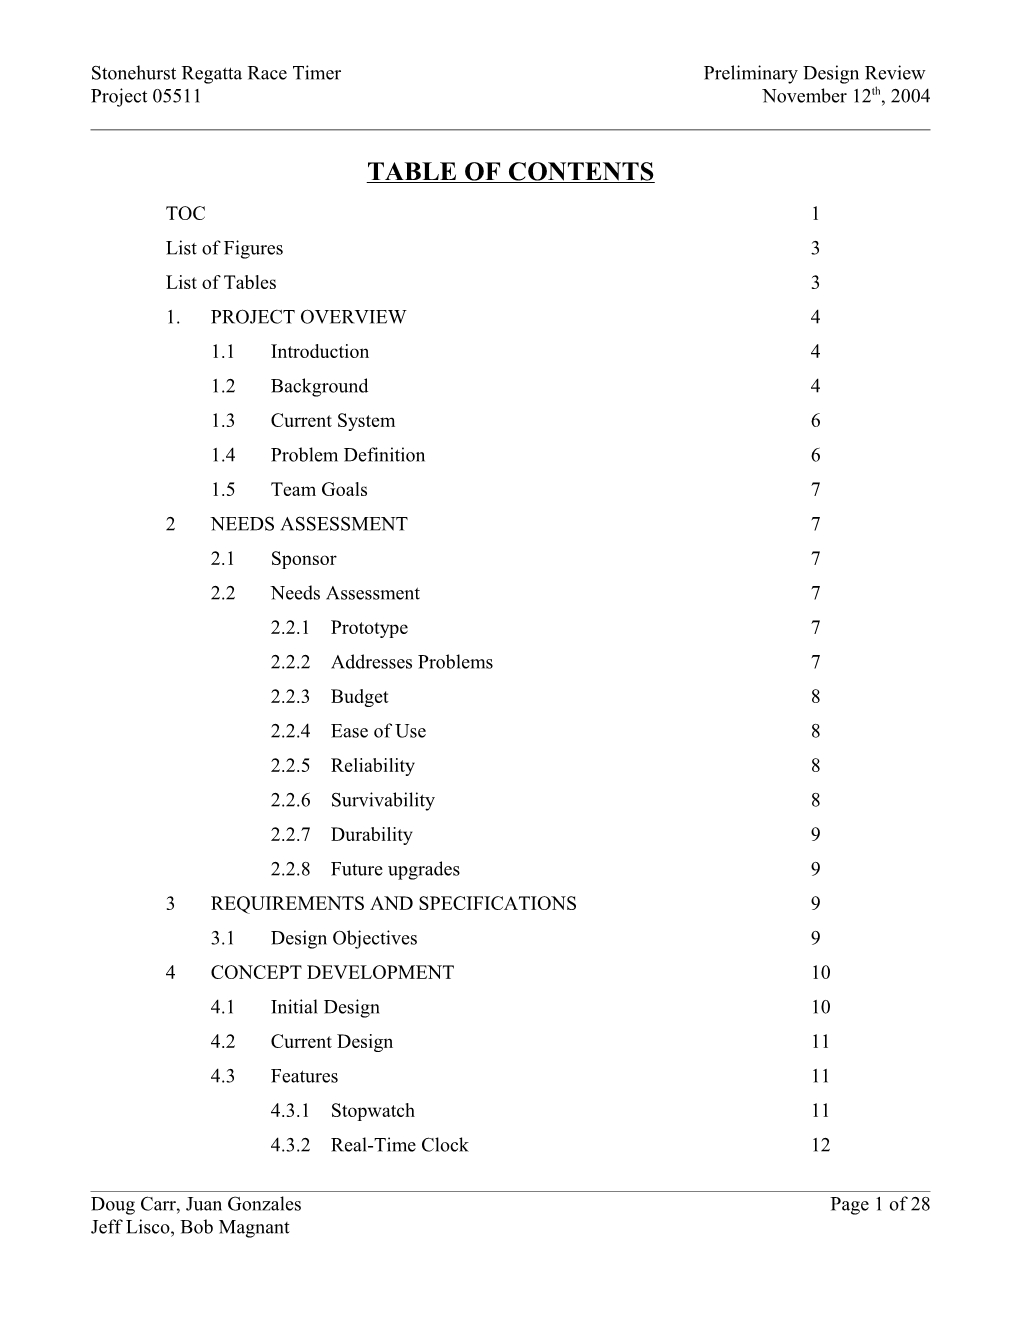 Table of Contents s310